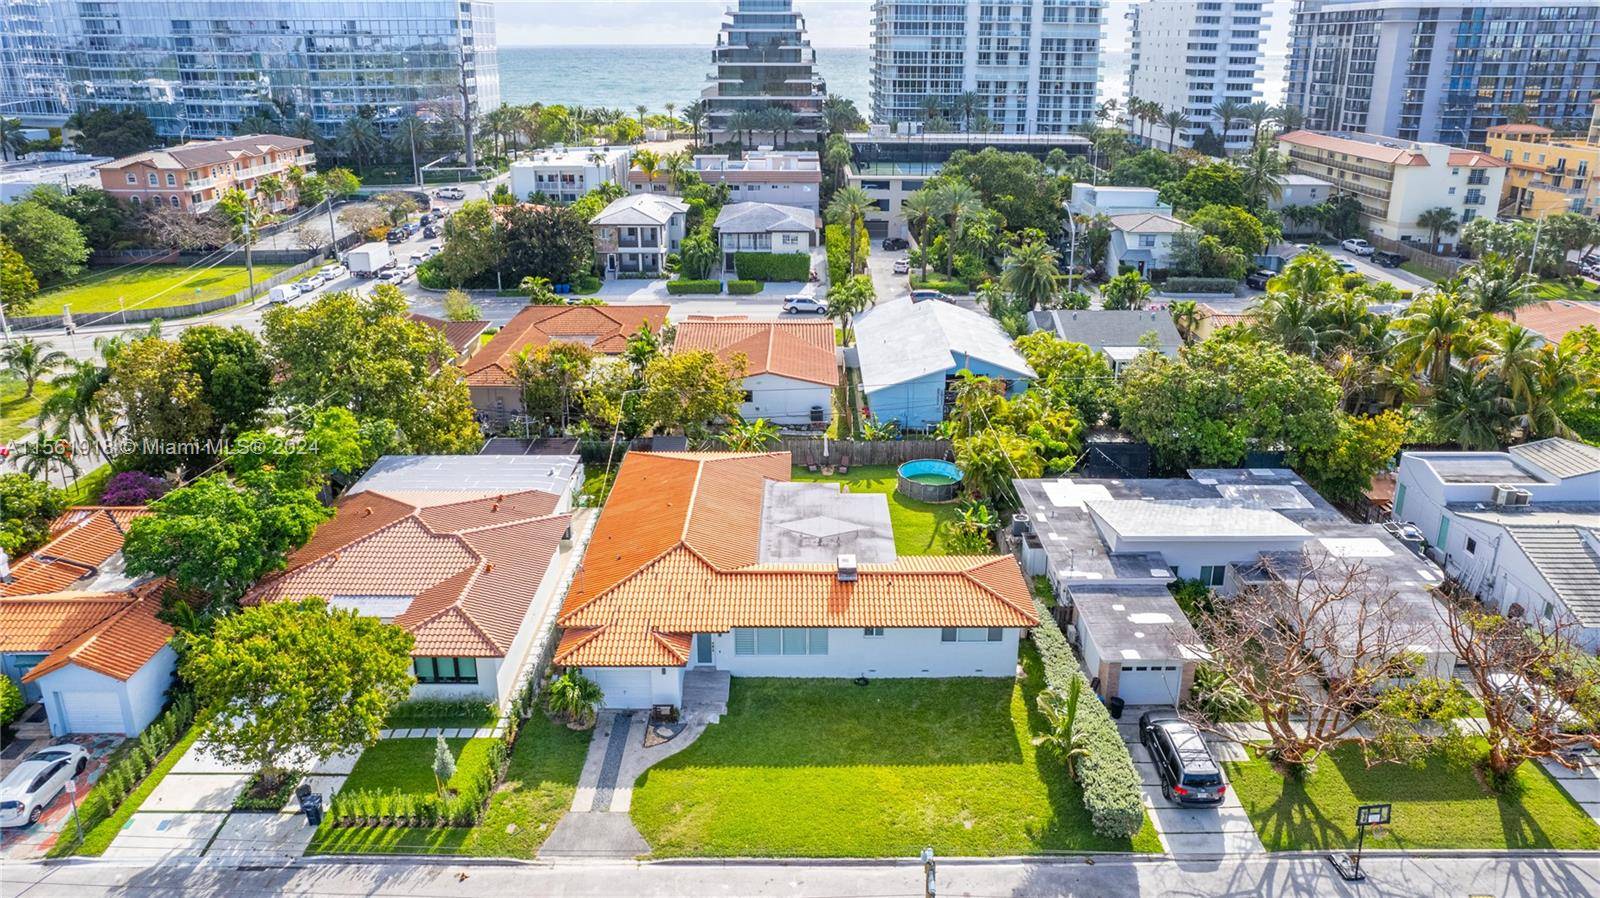 Prime location in Surfside with close proximity to stunning beaches, Bal Harbour shops, and places of worship.